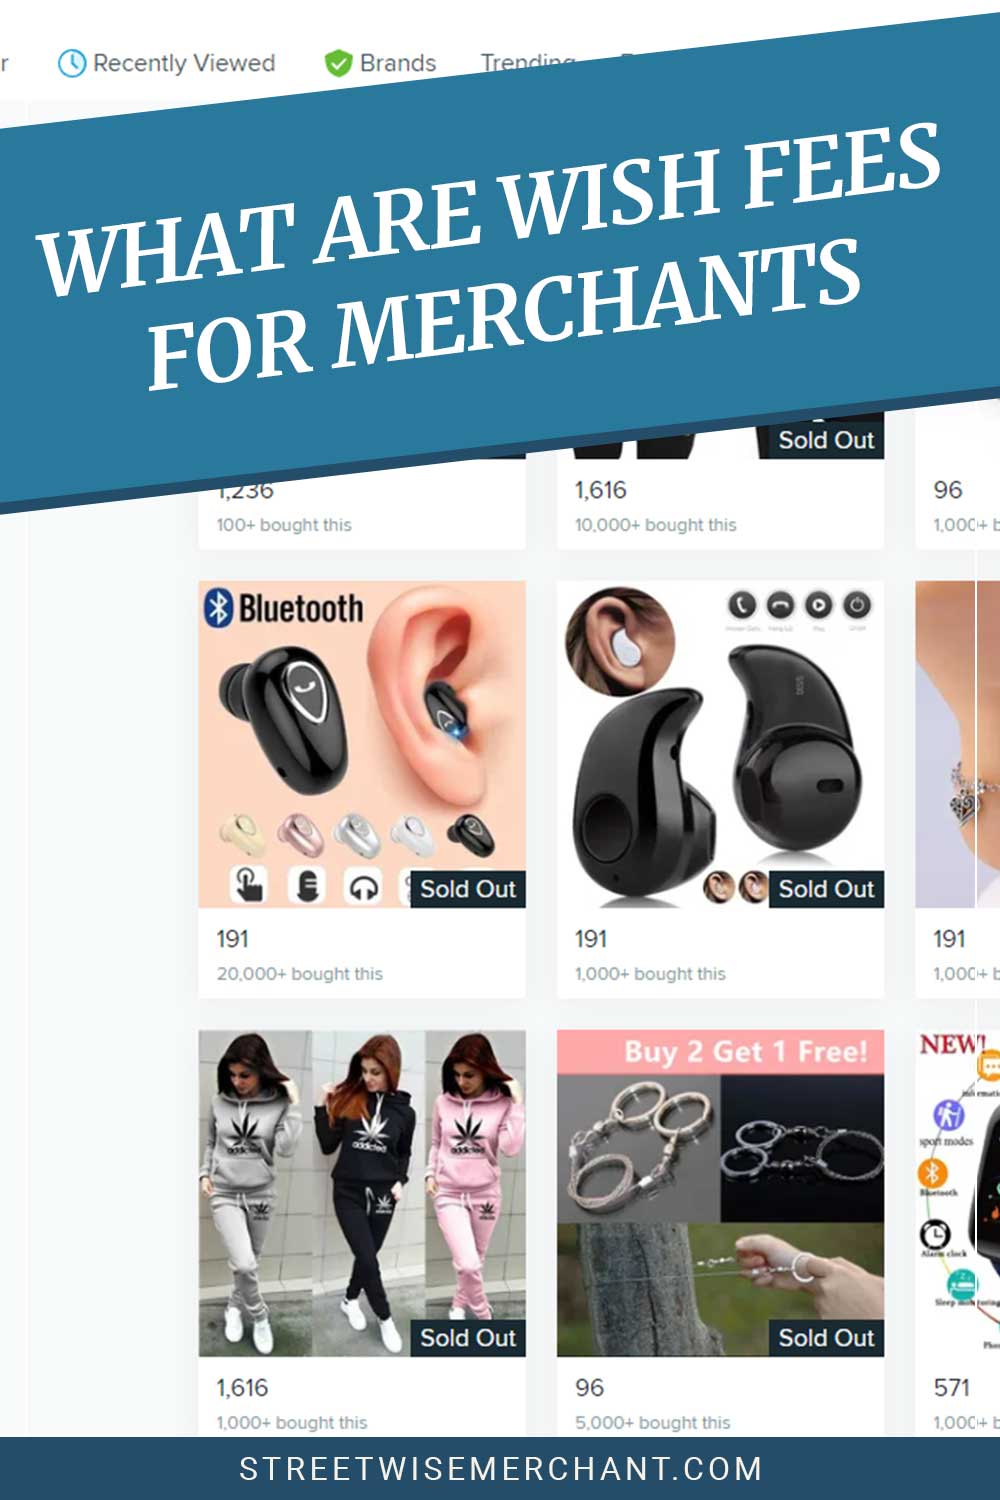 Wish.com Homepage - What Are Wish Fees for Merchants